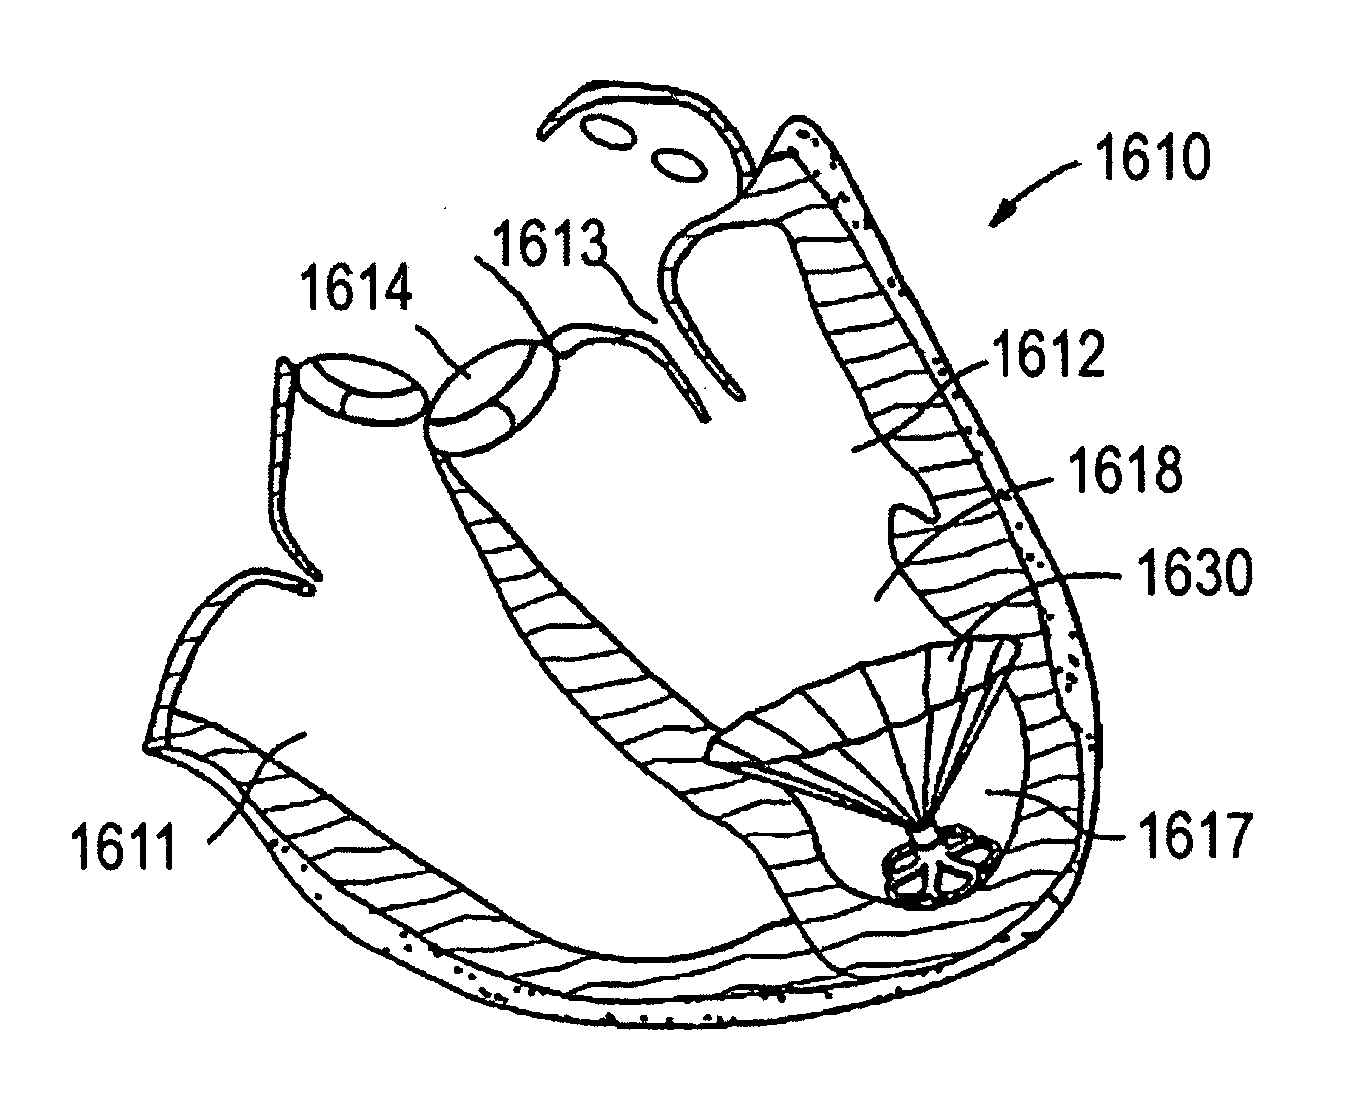 Cardiac device and methods of use thereof